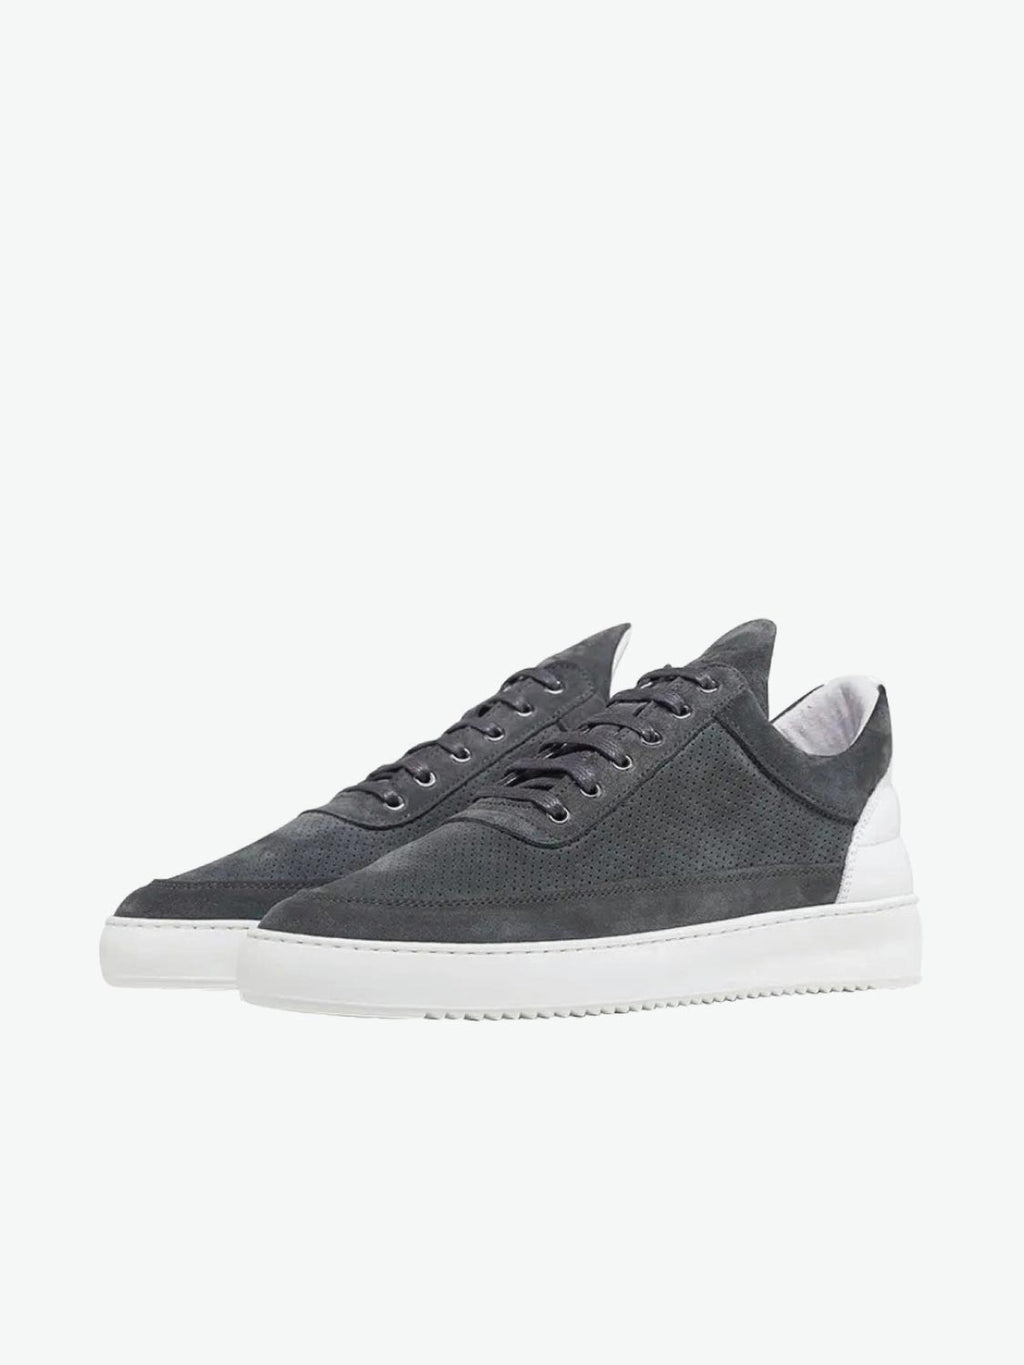 Filling Pieces Low Top Ripple Perforated Dark Grey | The Project Garments - B